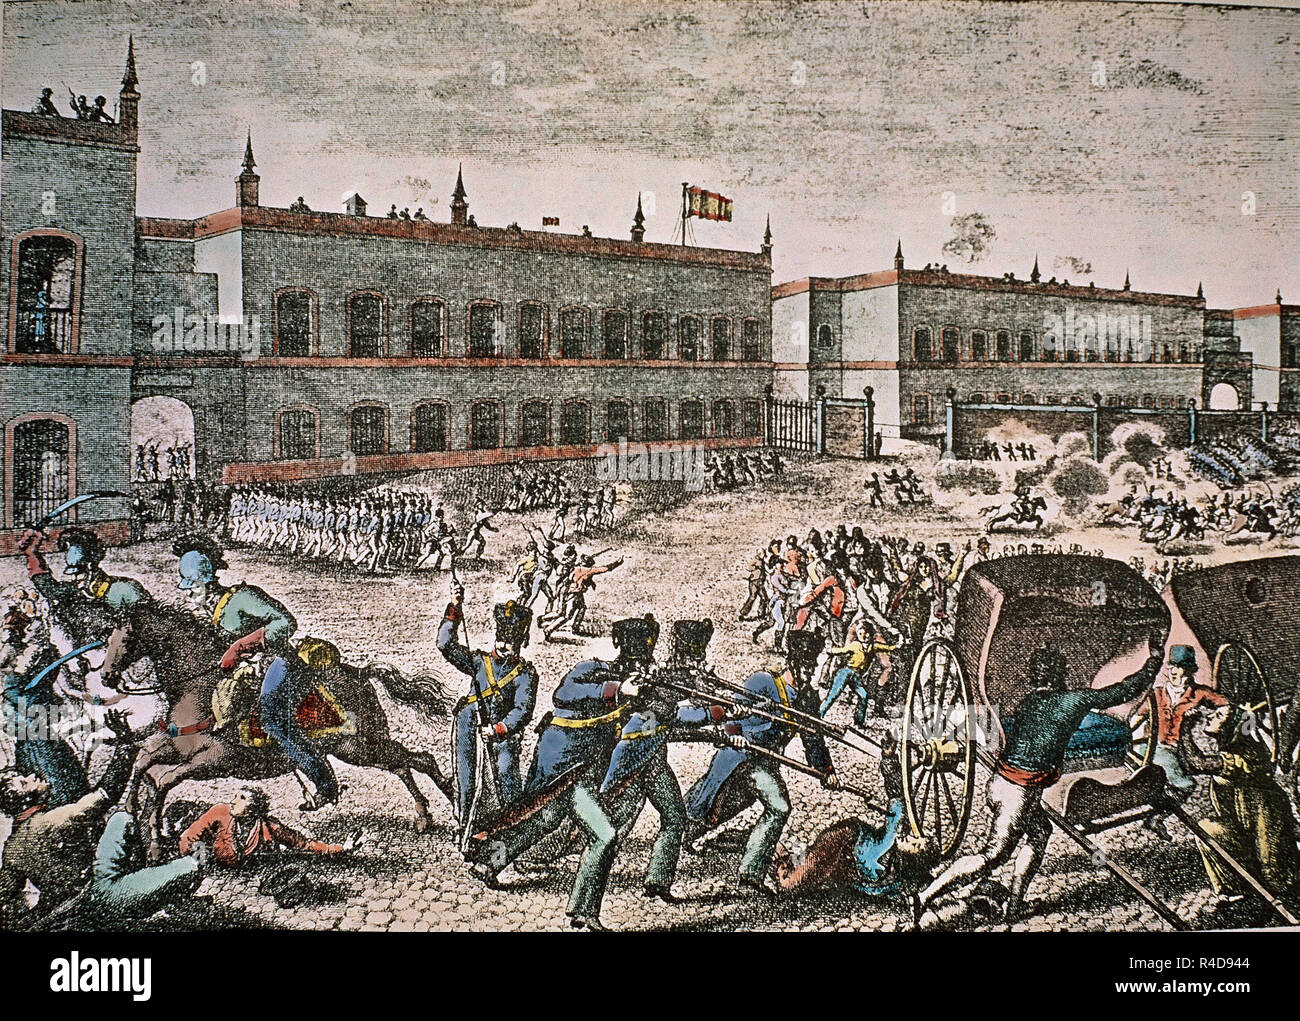 March, 10th 1820 in Cadiz: General Riego's Troops Fighting the Absolutists and Proclaiming the Consitution of Cadiz. Madrid, private collection. Location: PRIVATE COLLECTION. MADRID. SPAIN. Stock Photo